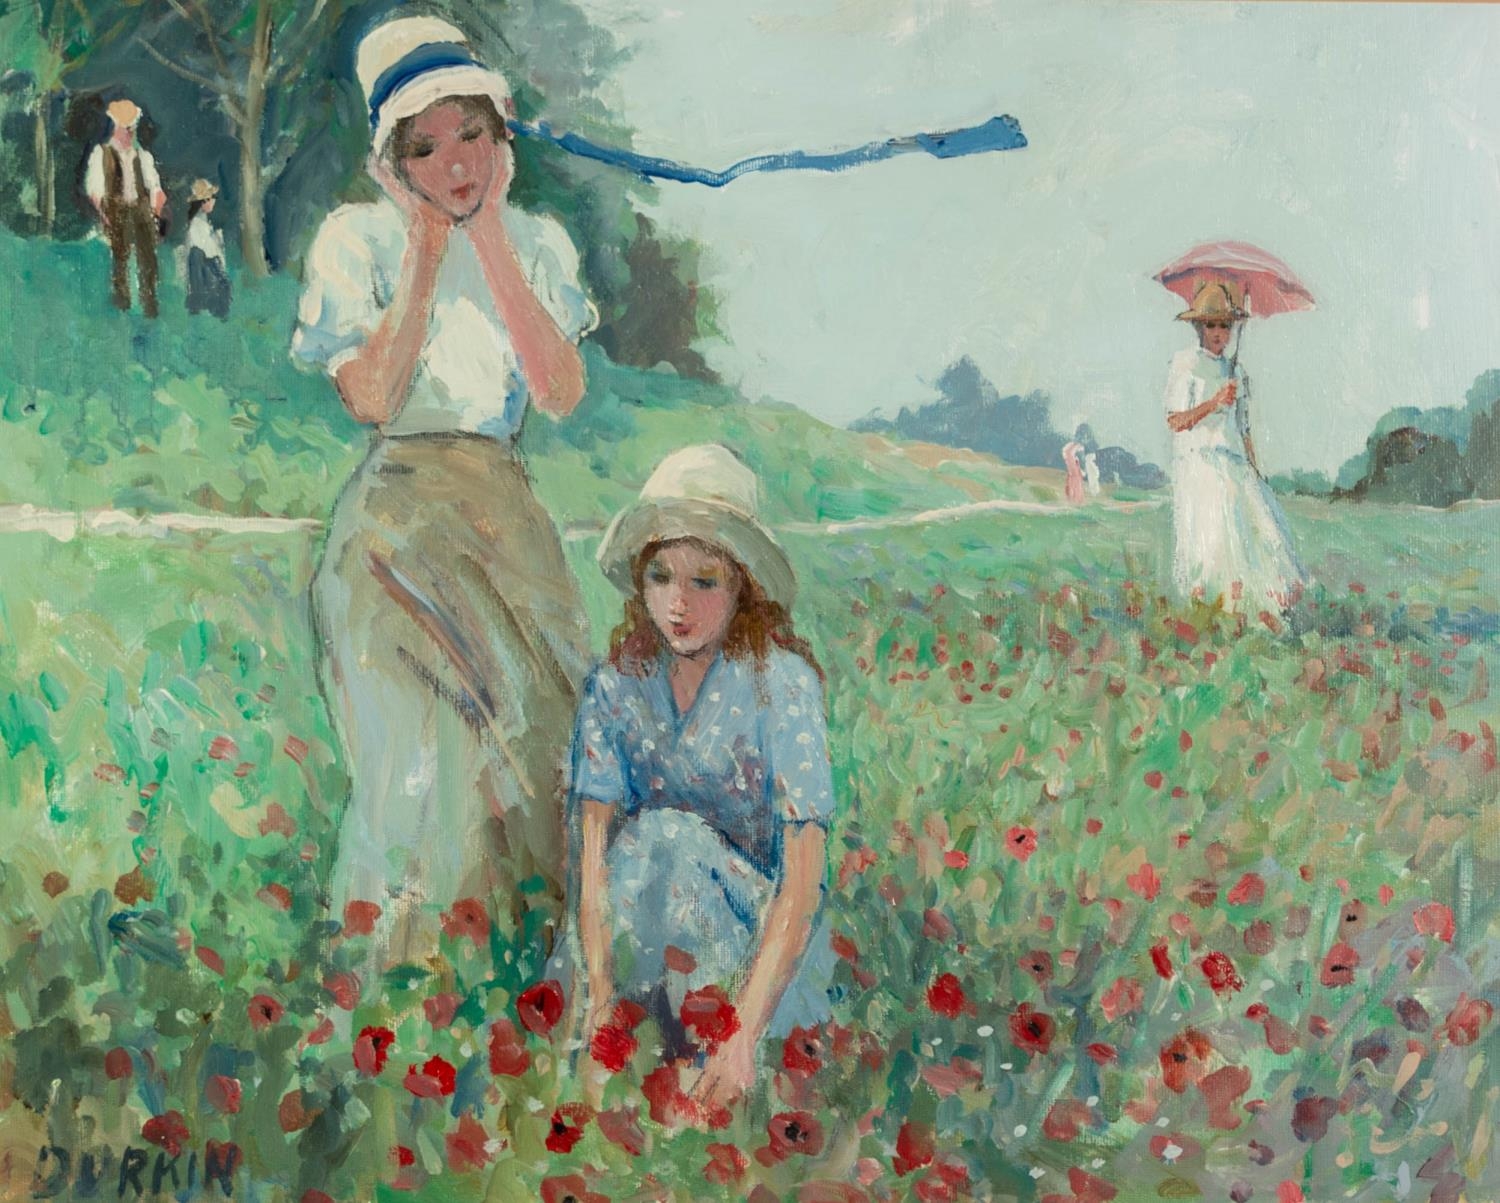 TOM DURKIN (1928-1990) ACRYLIC ON BOARD, behind glass ?Picking Poppies? Signed, titled to Unicorn